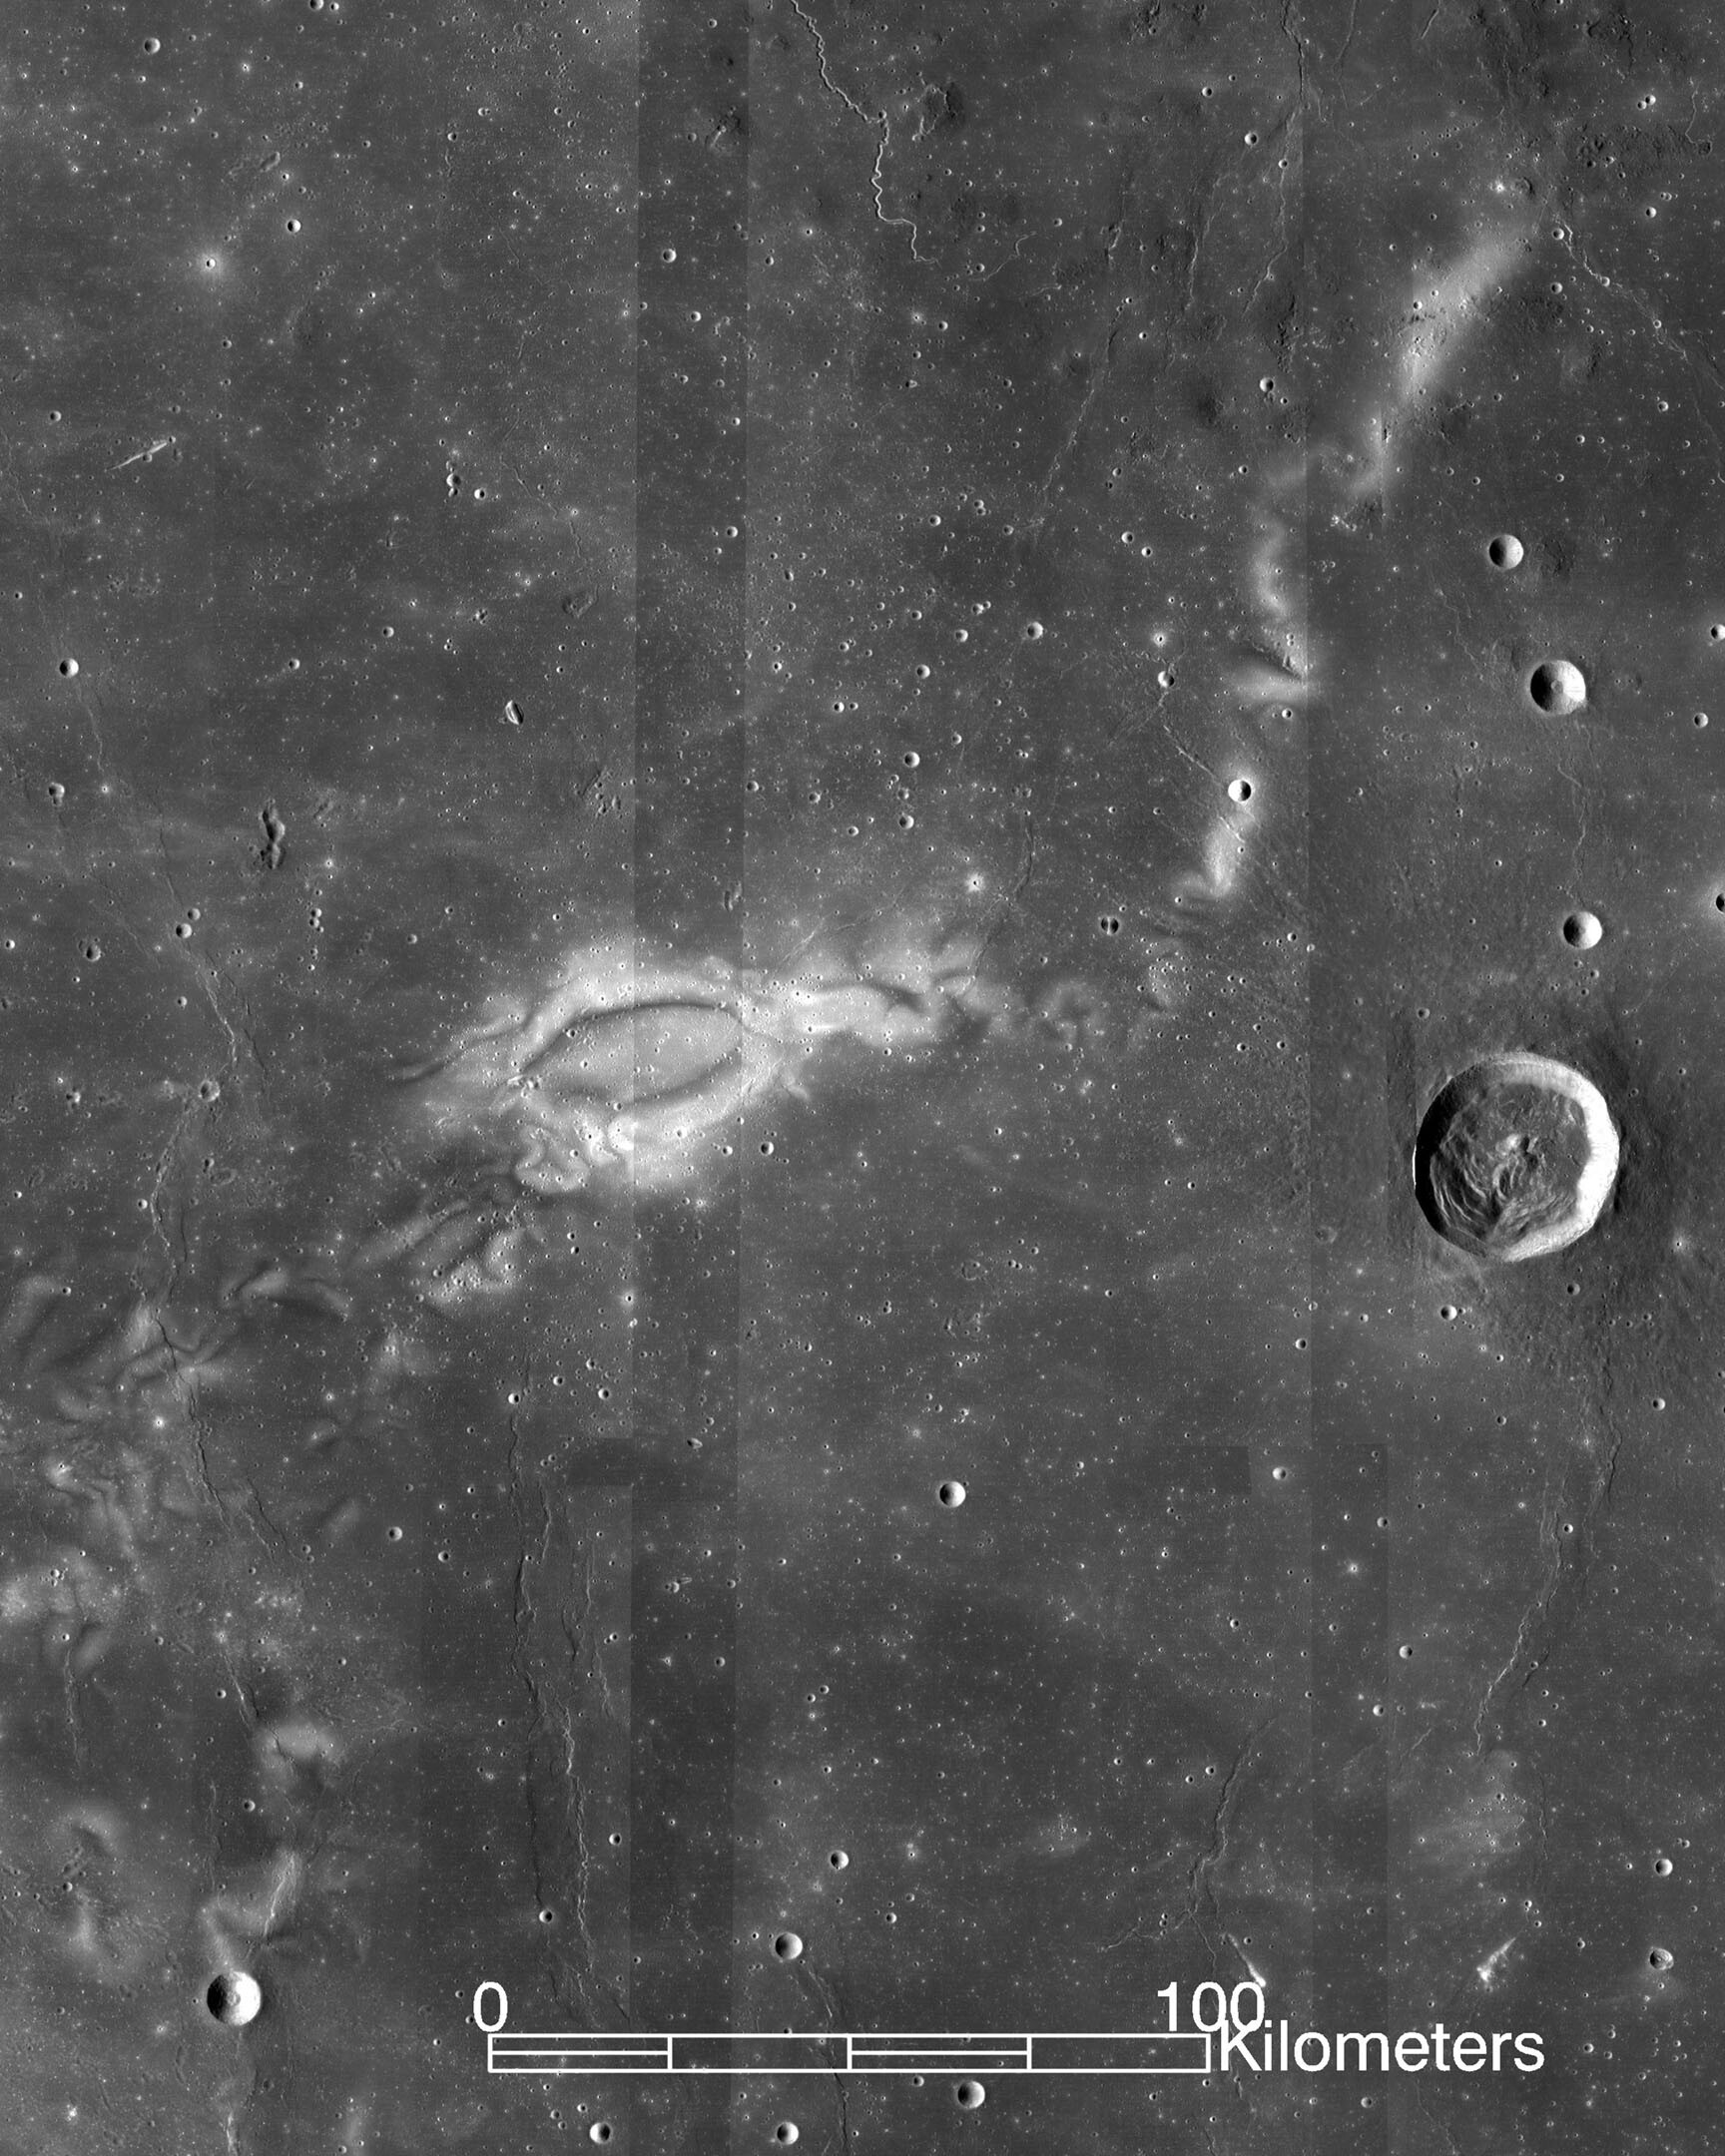 Light and dark marks on the Moon.